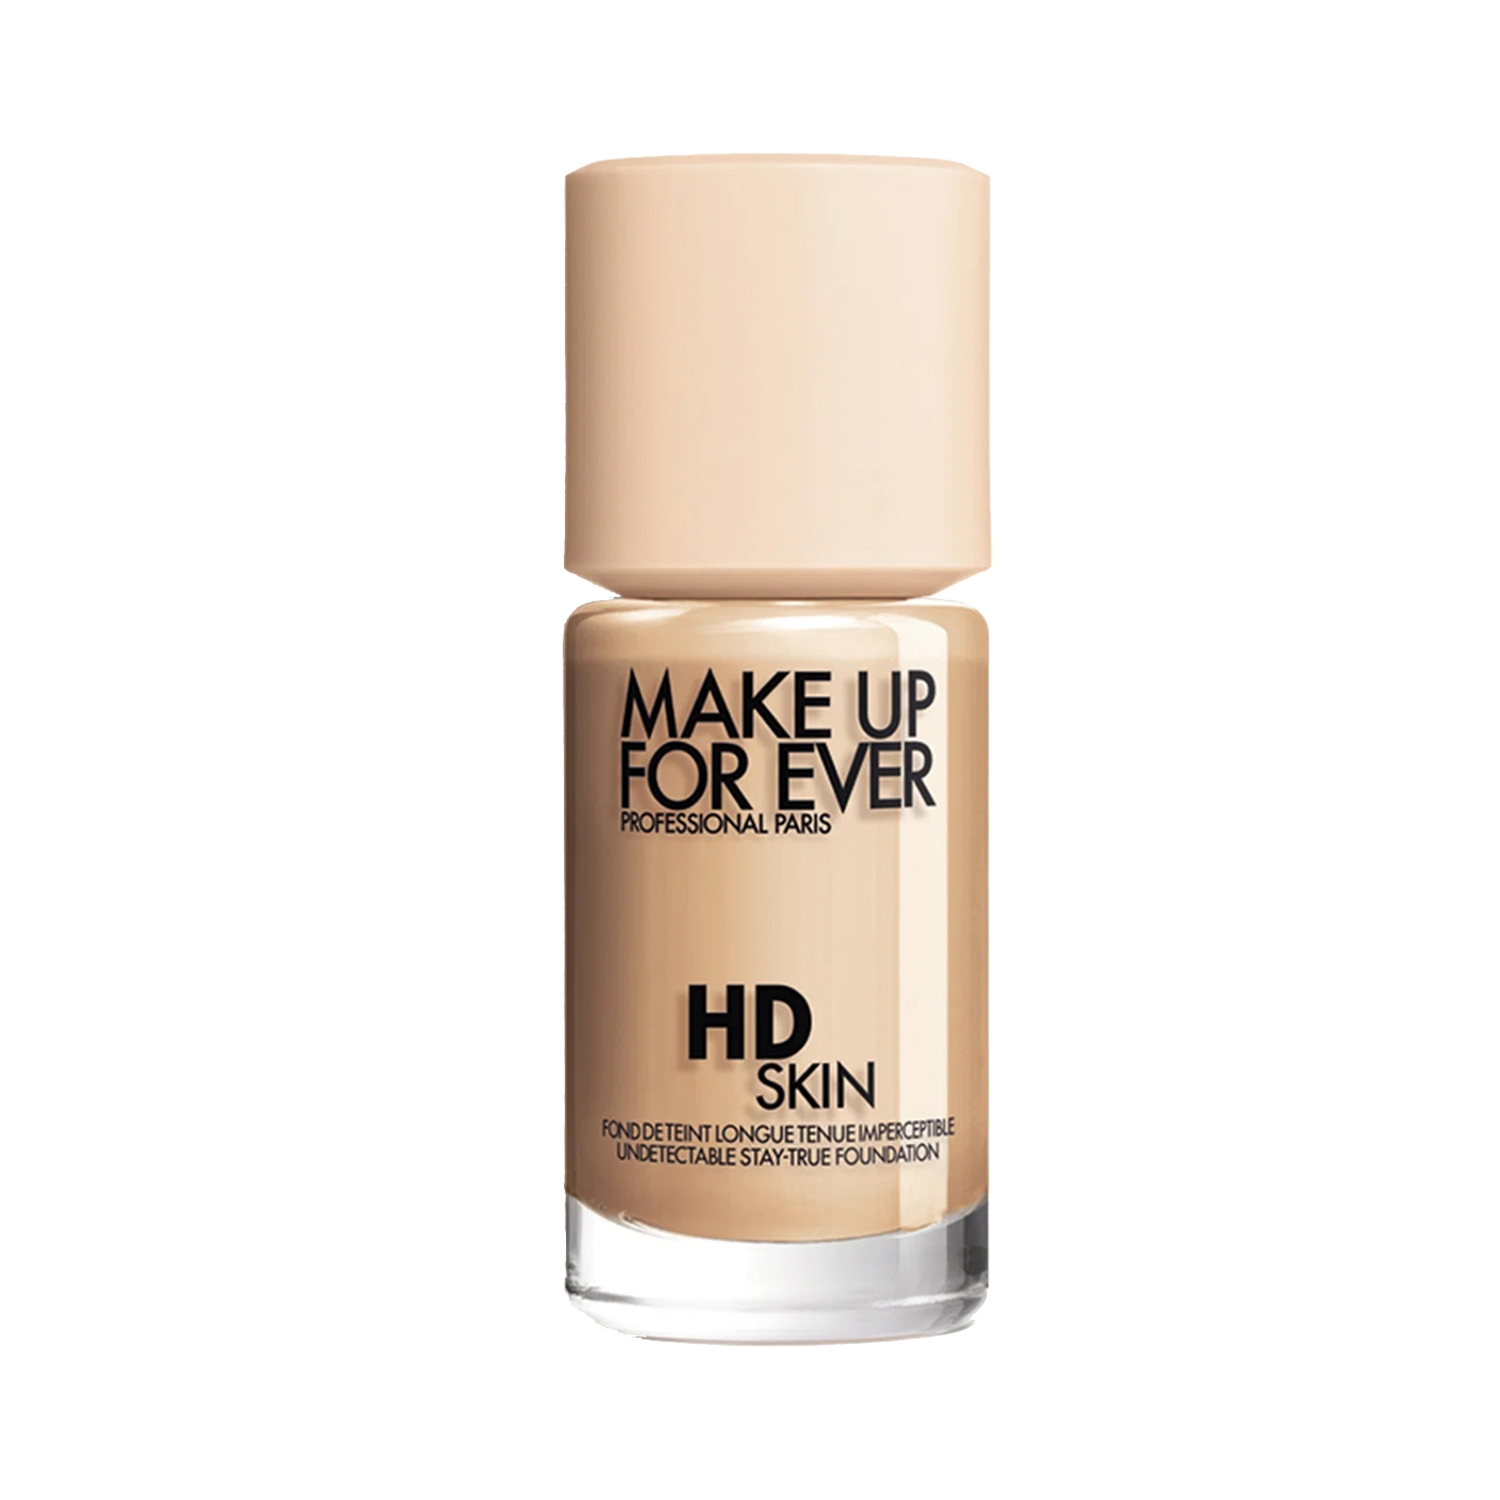 Make Up For Ever | Make Up For Ever Hd Skin Foundation-1Y16 (Y242) (30ml)